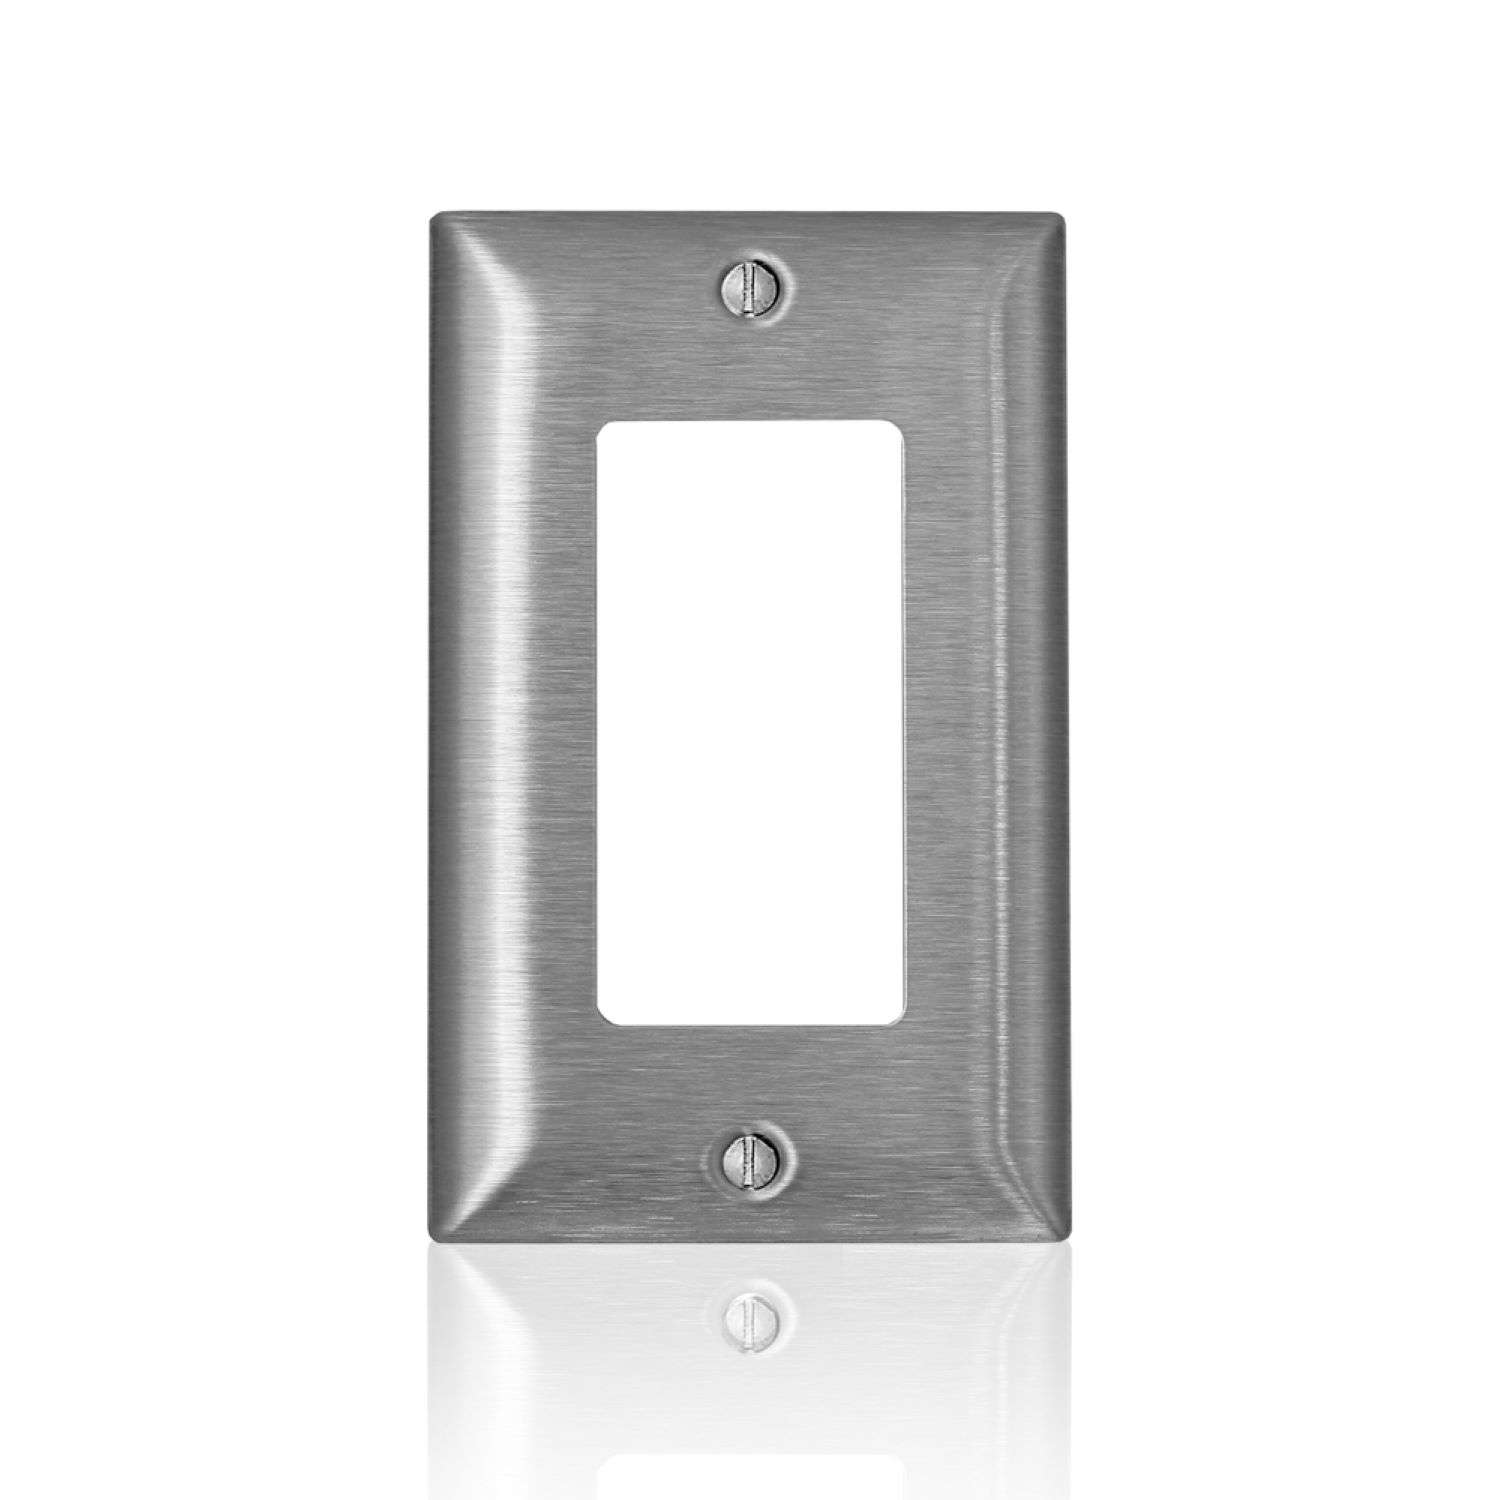 Leviton C-Series Stainless Steel 1 gang Metal Decora/GFCI Wall Plate 1 1 Gang Decora Wall Plate Stainless Steel